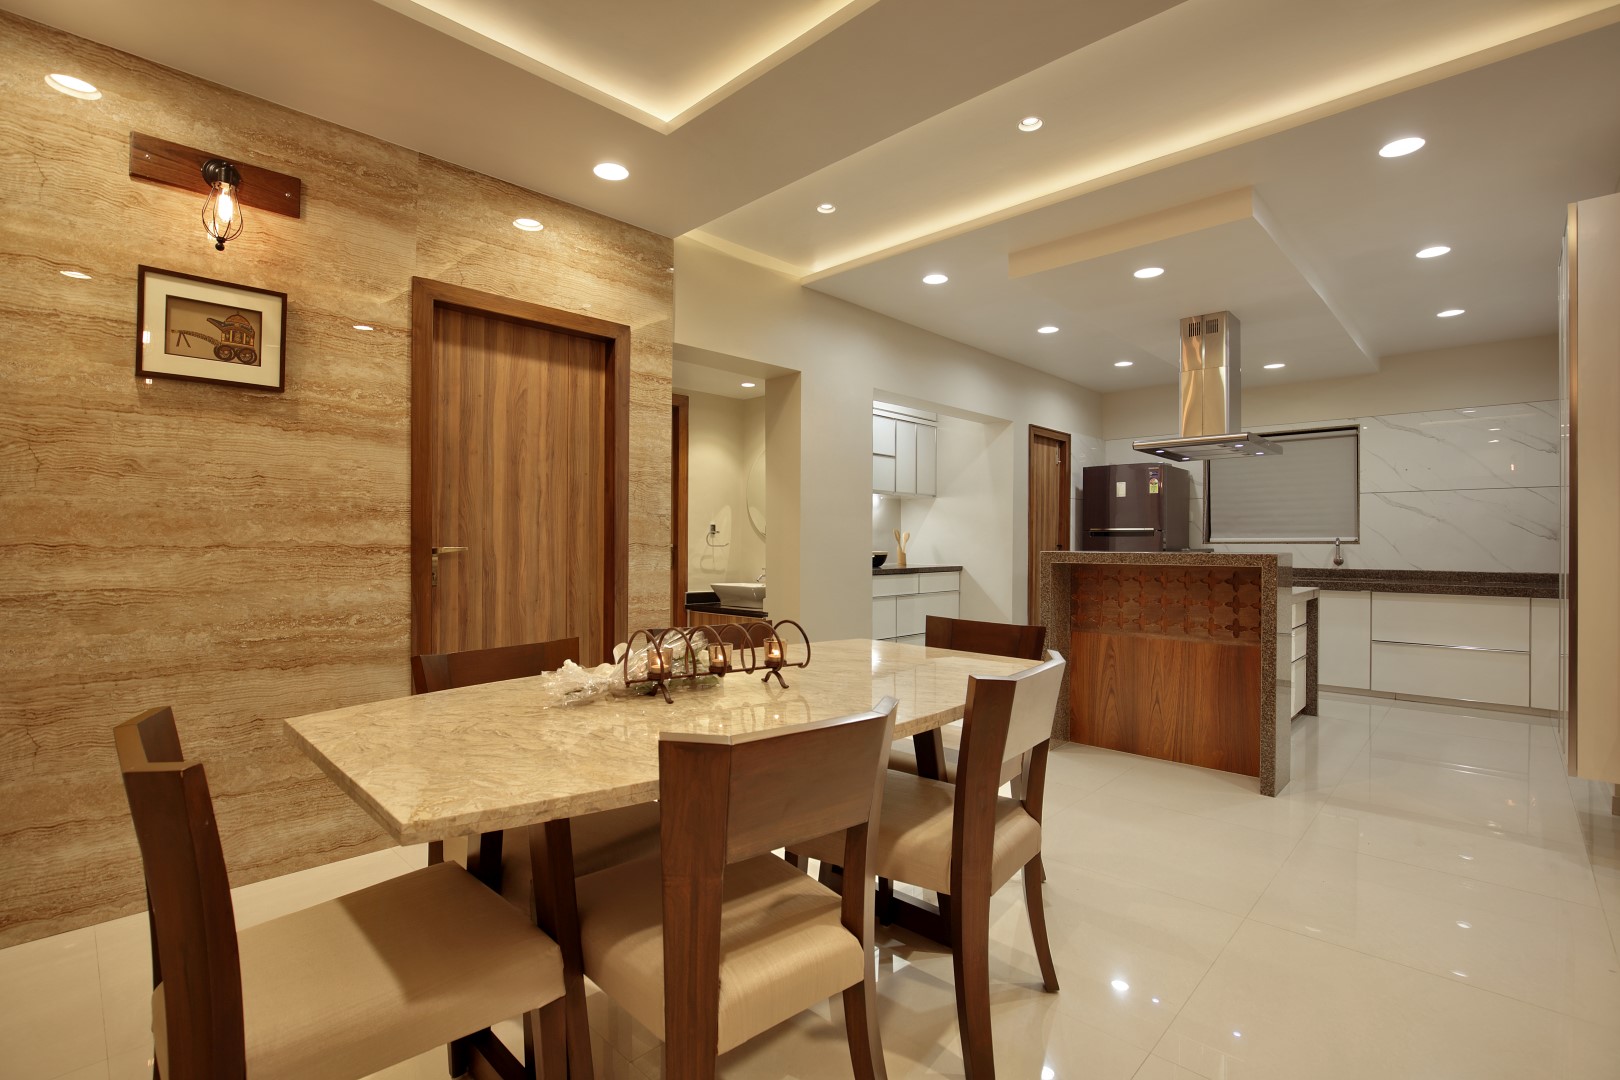 Thiết kế nội thất chung cư - Fusion Design Of Apartment Is Aesthetically Appealing